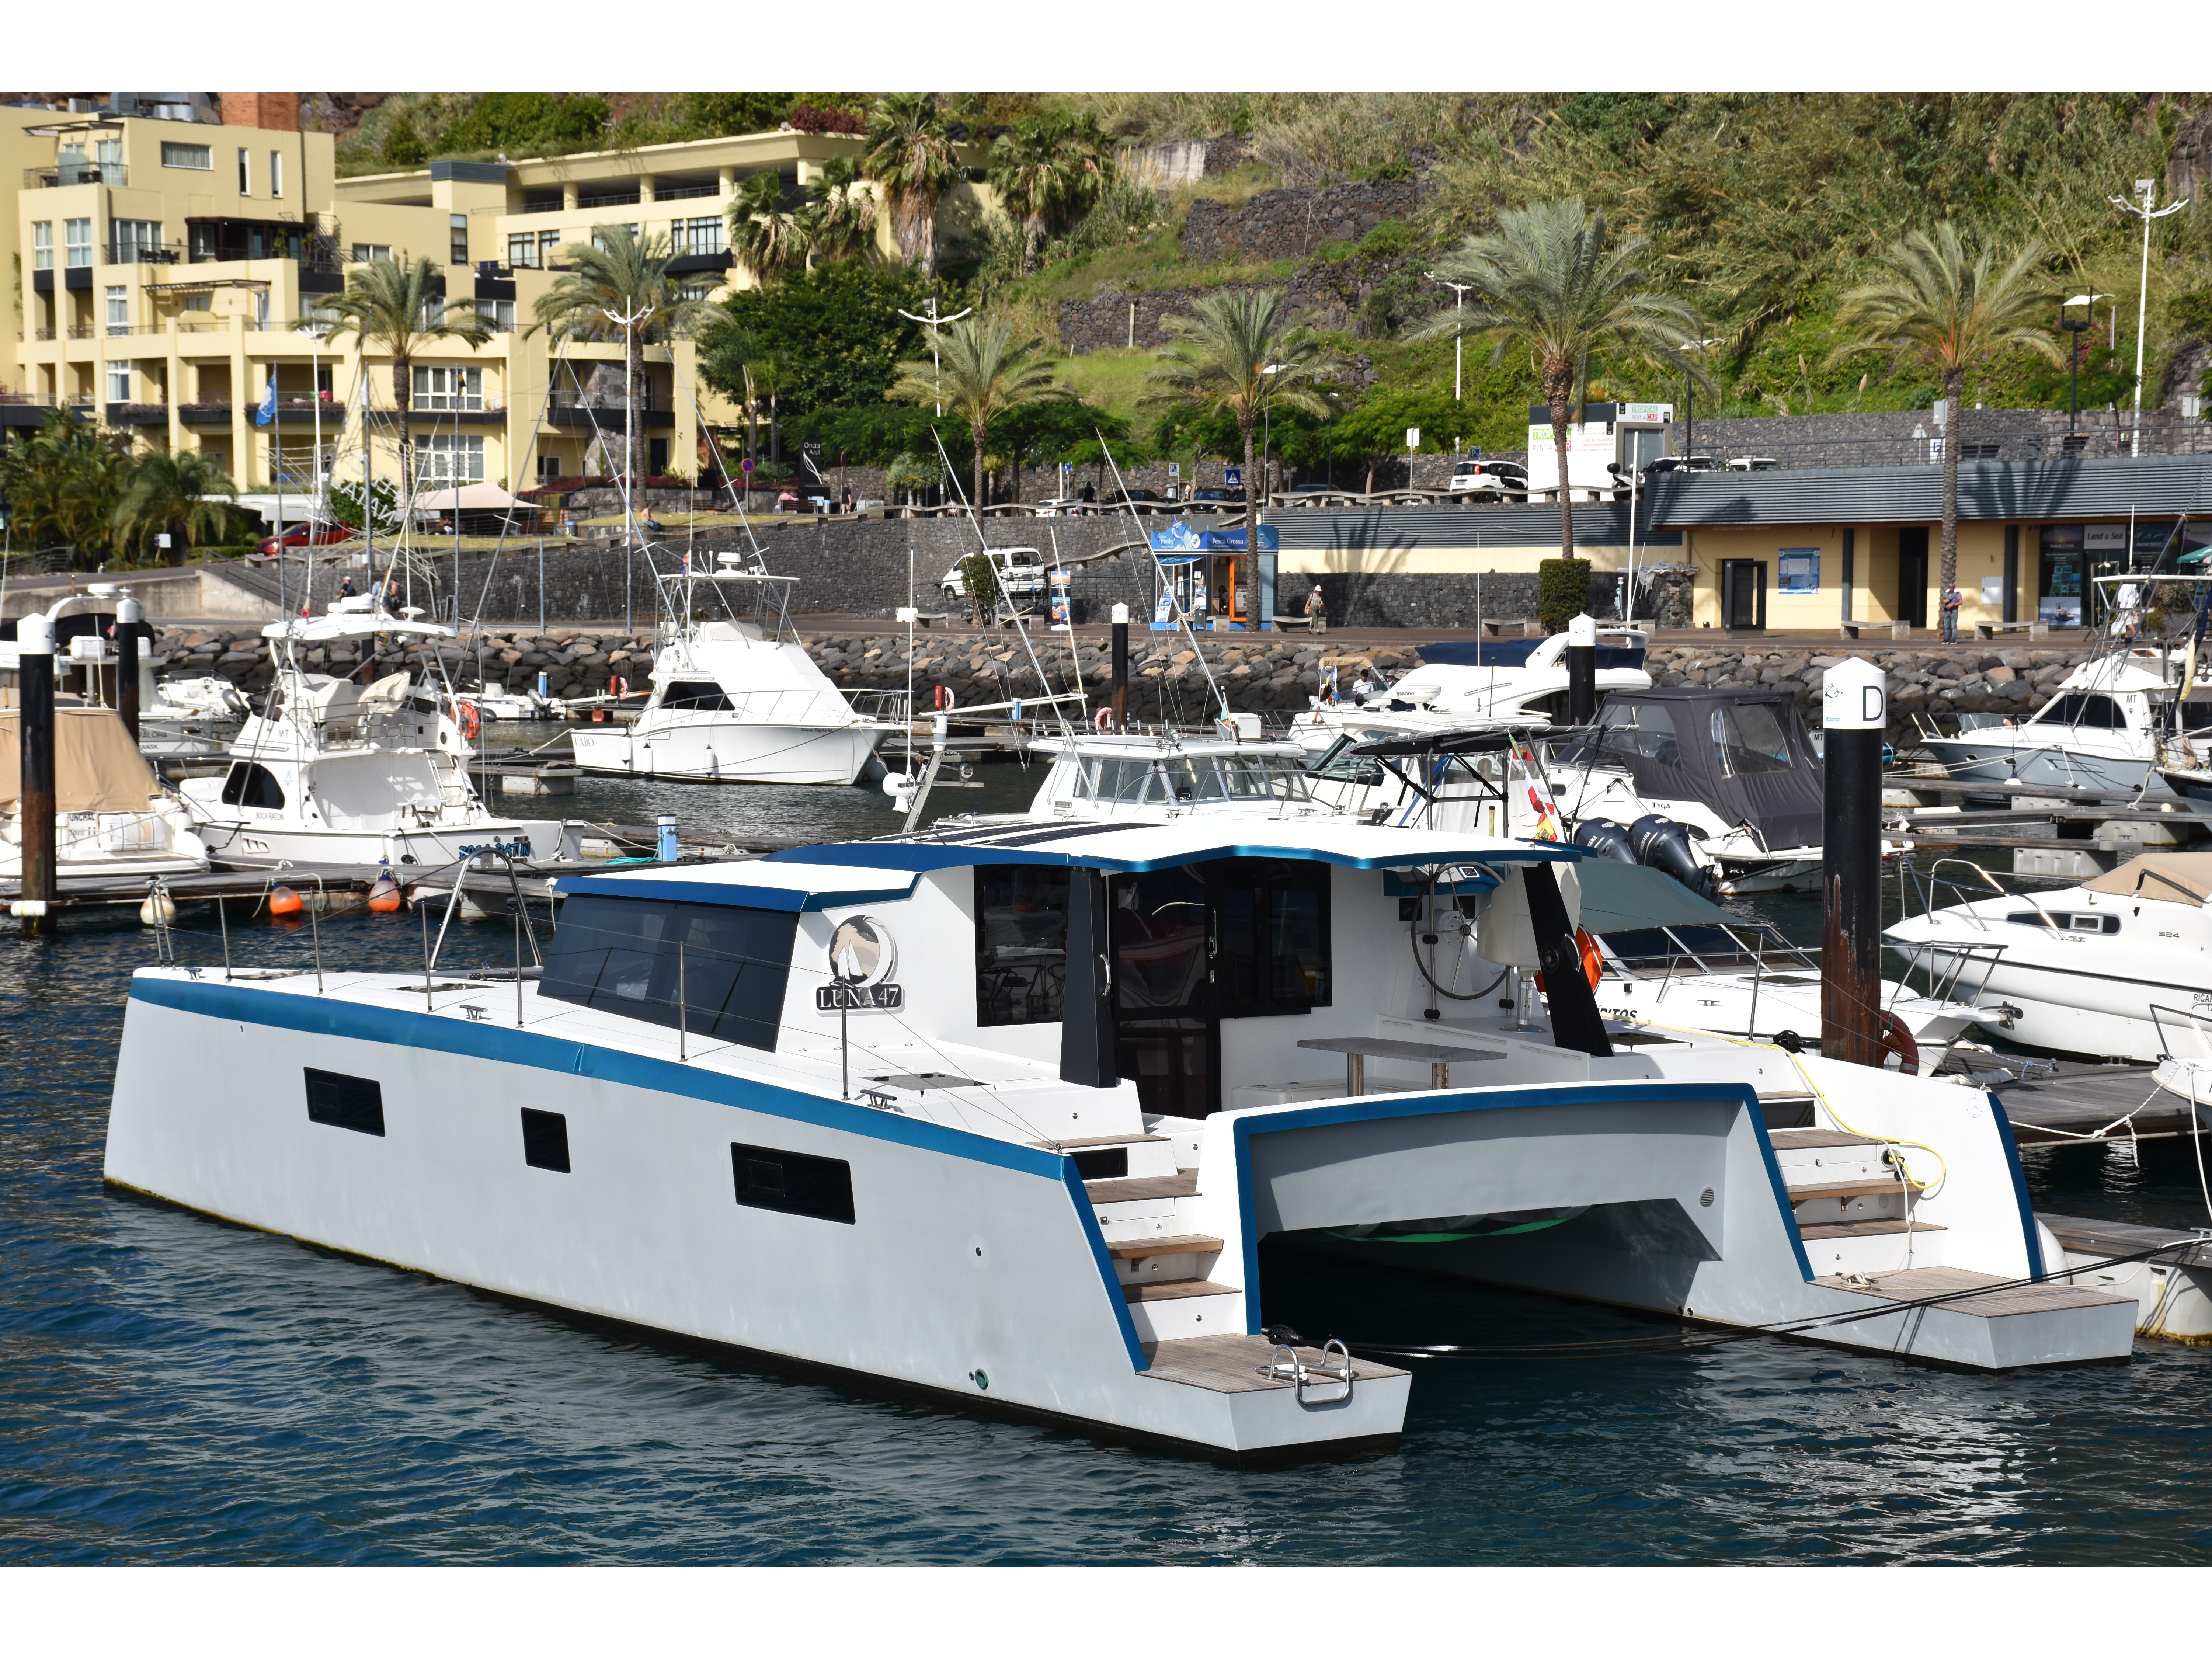 Luna 47 Power - Motor Boat Charter Portugal & Boat hire in Portugal Funchal Marina do Funchal 3